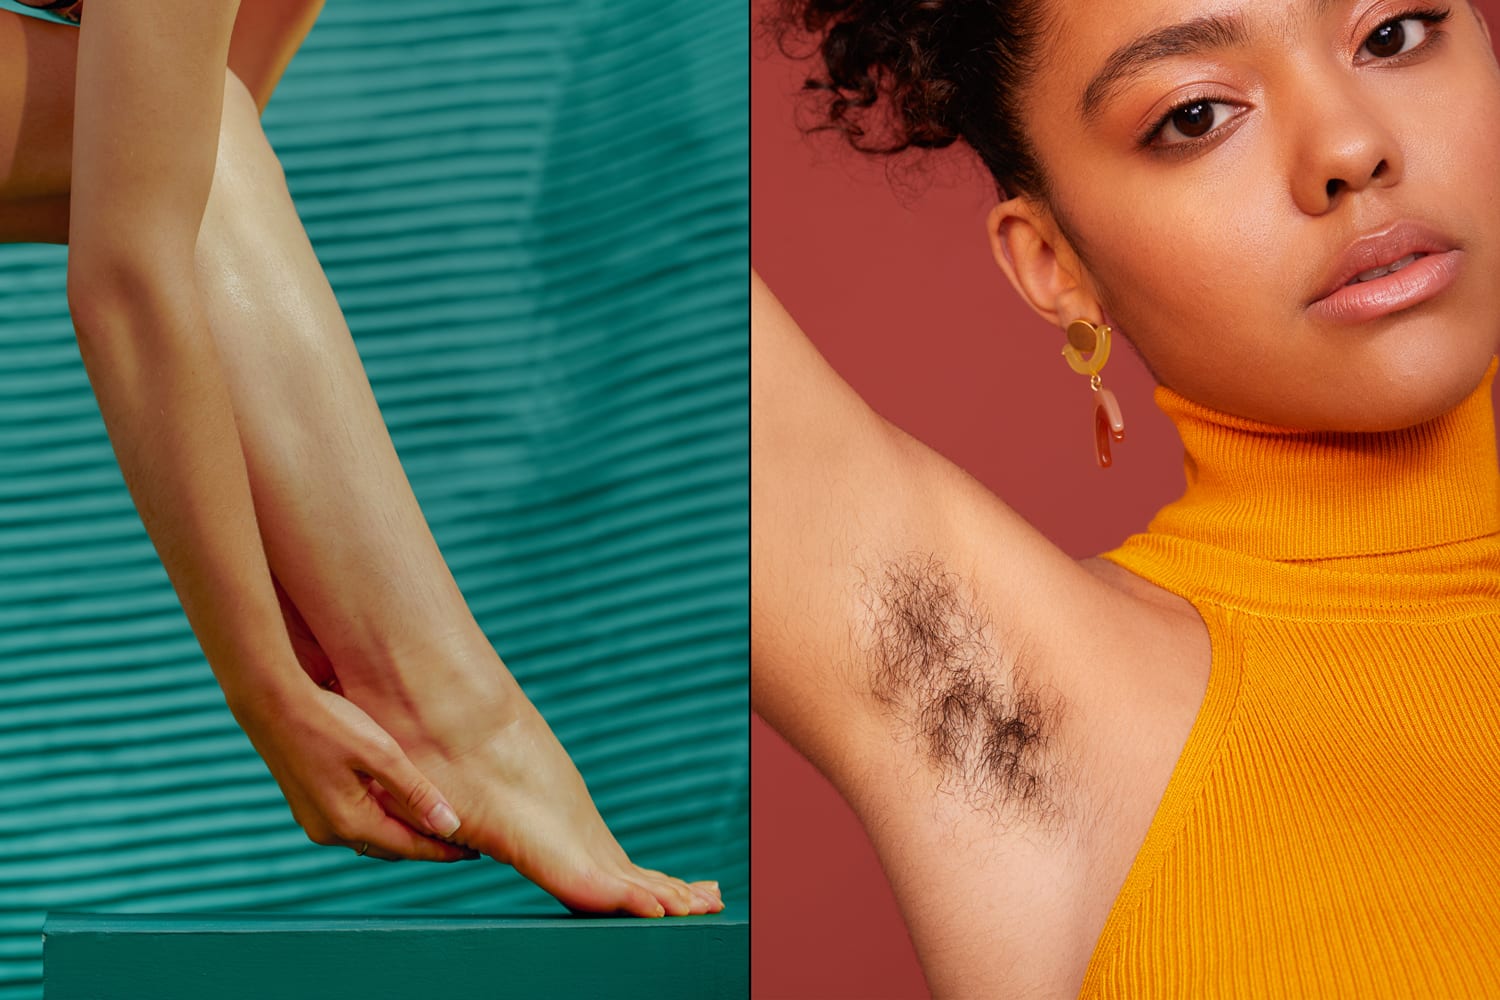 A side by side of a woman's unshaved leg and a woman showing her armpit hair.